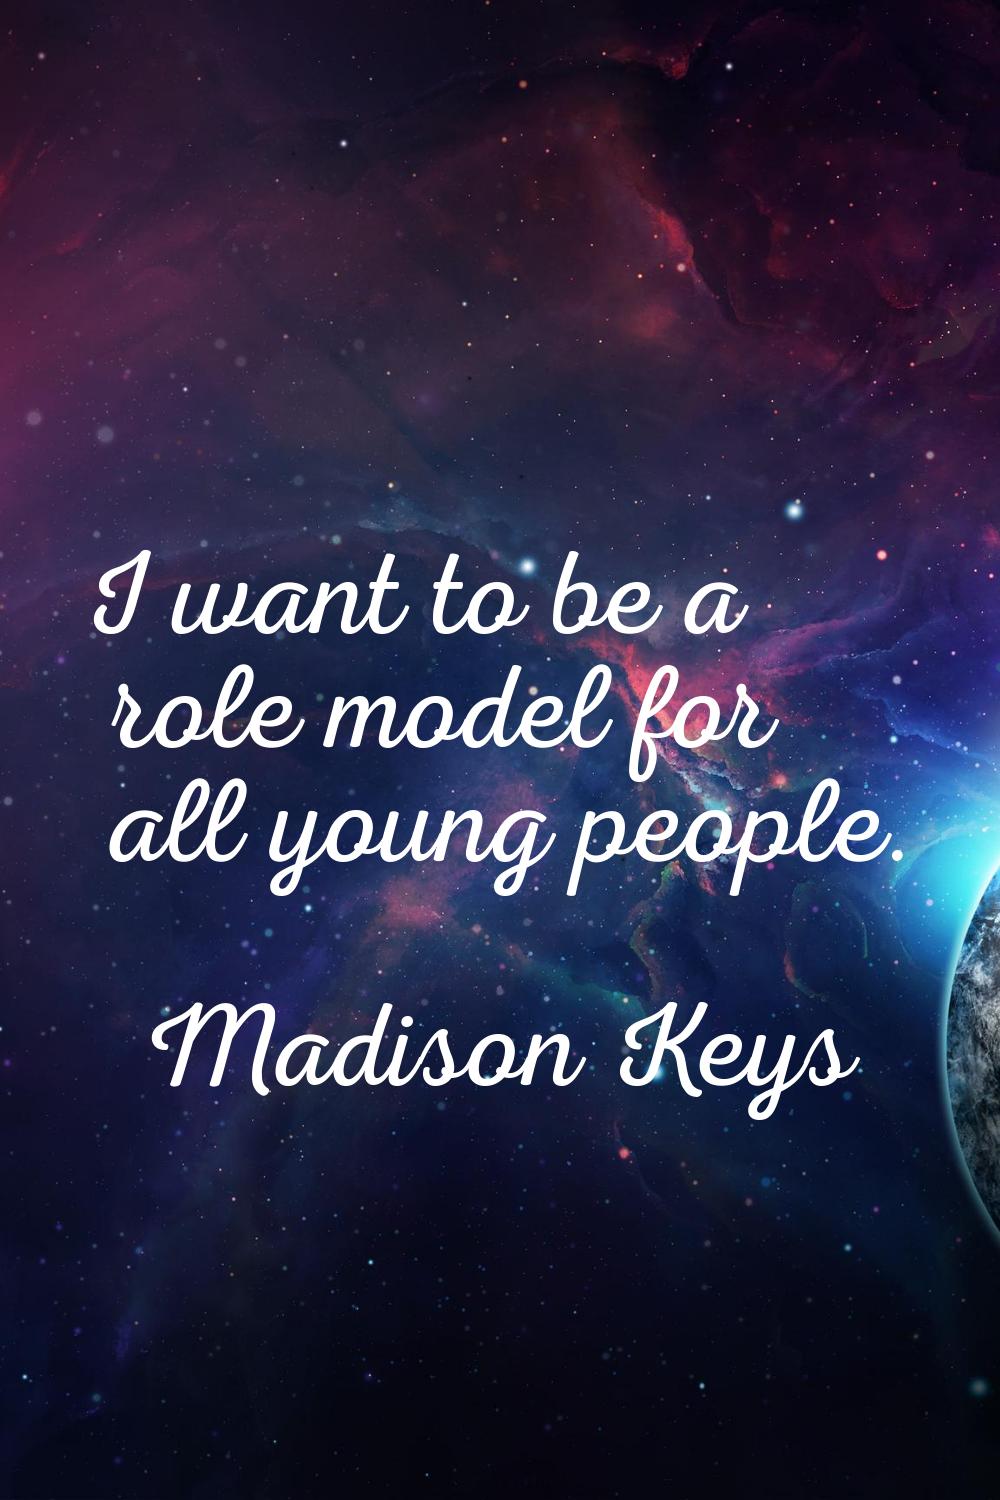 I want to be a role model for all young people.